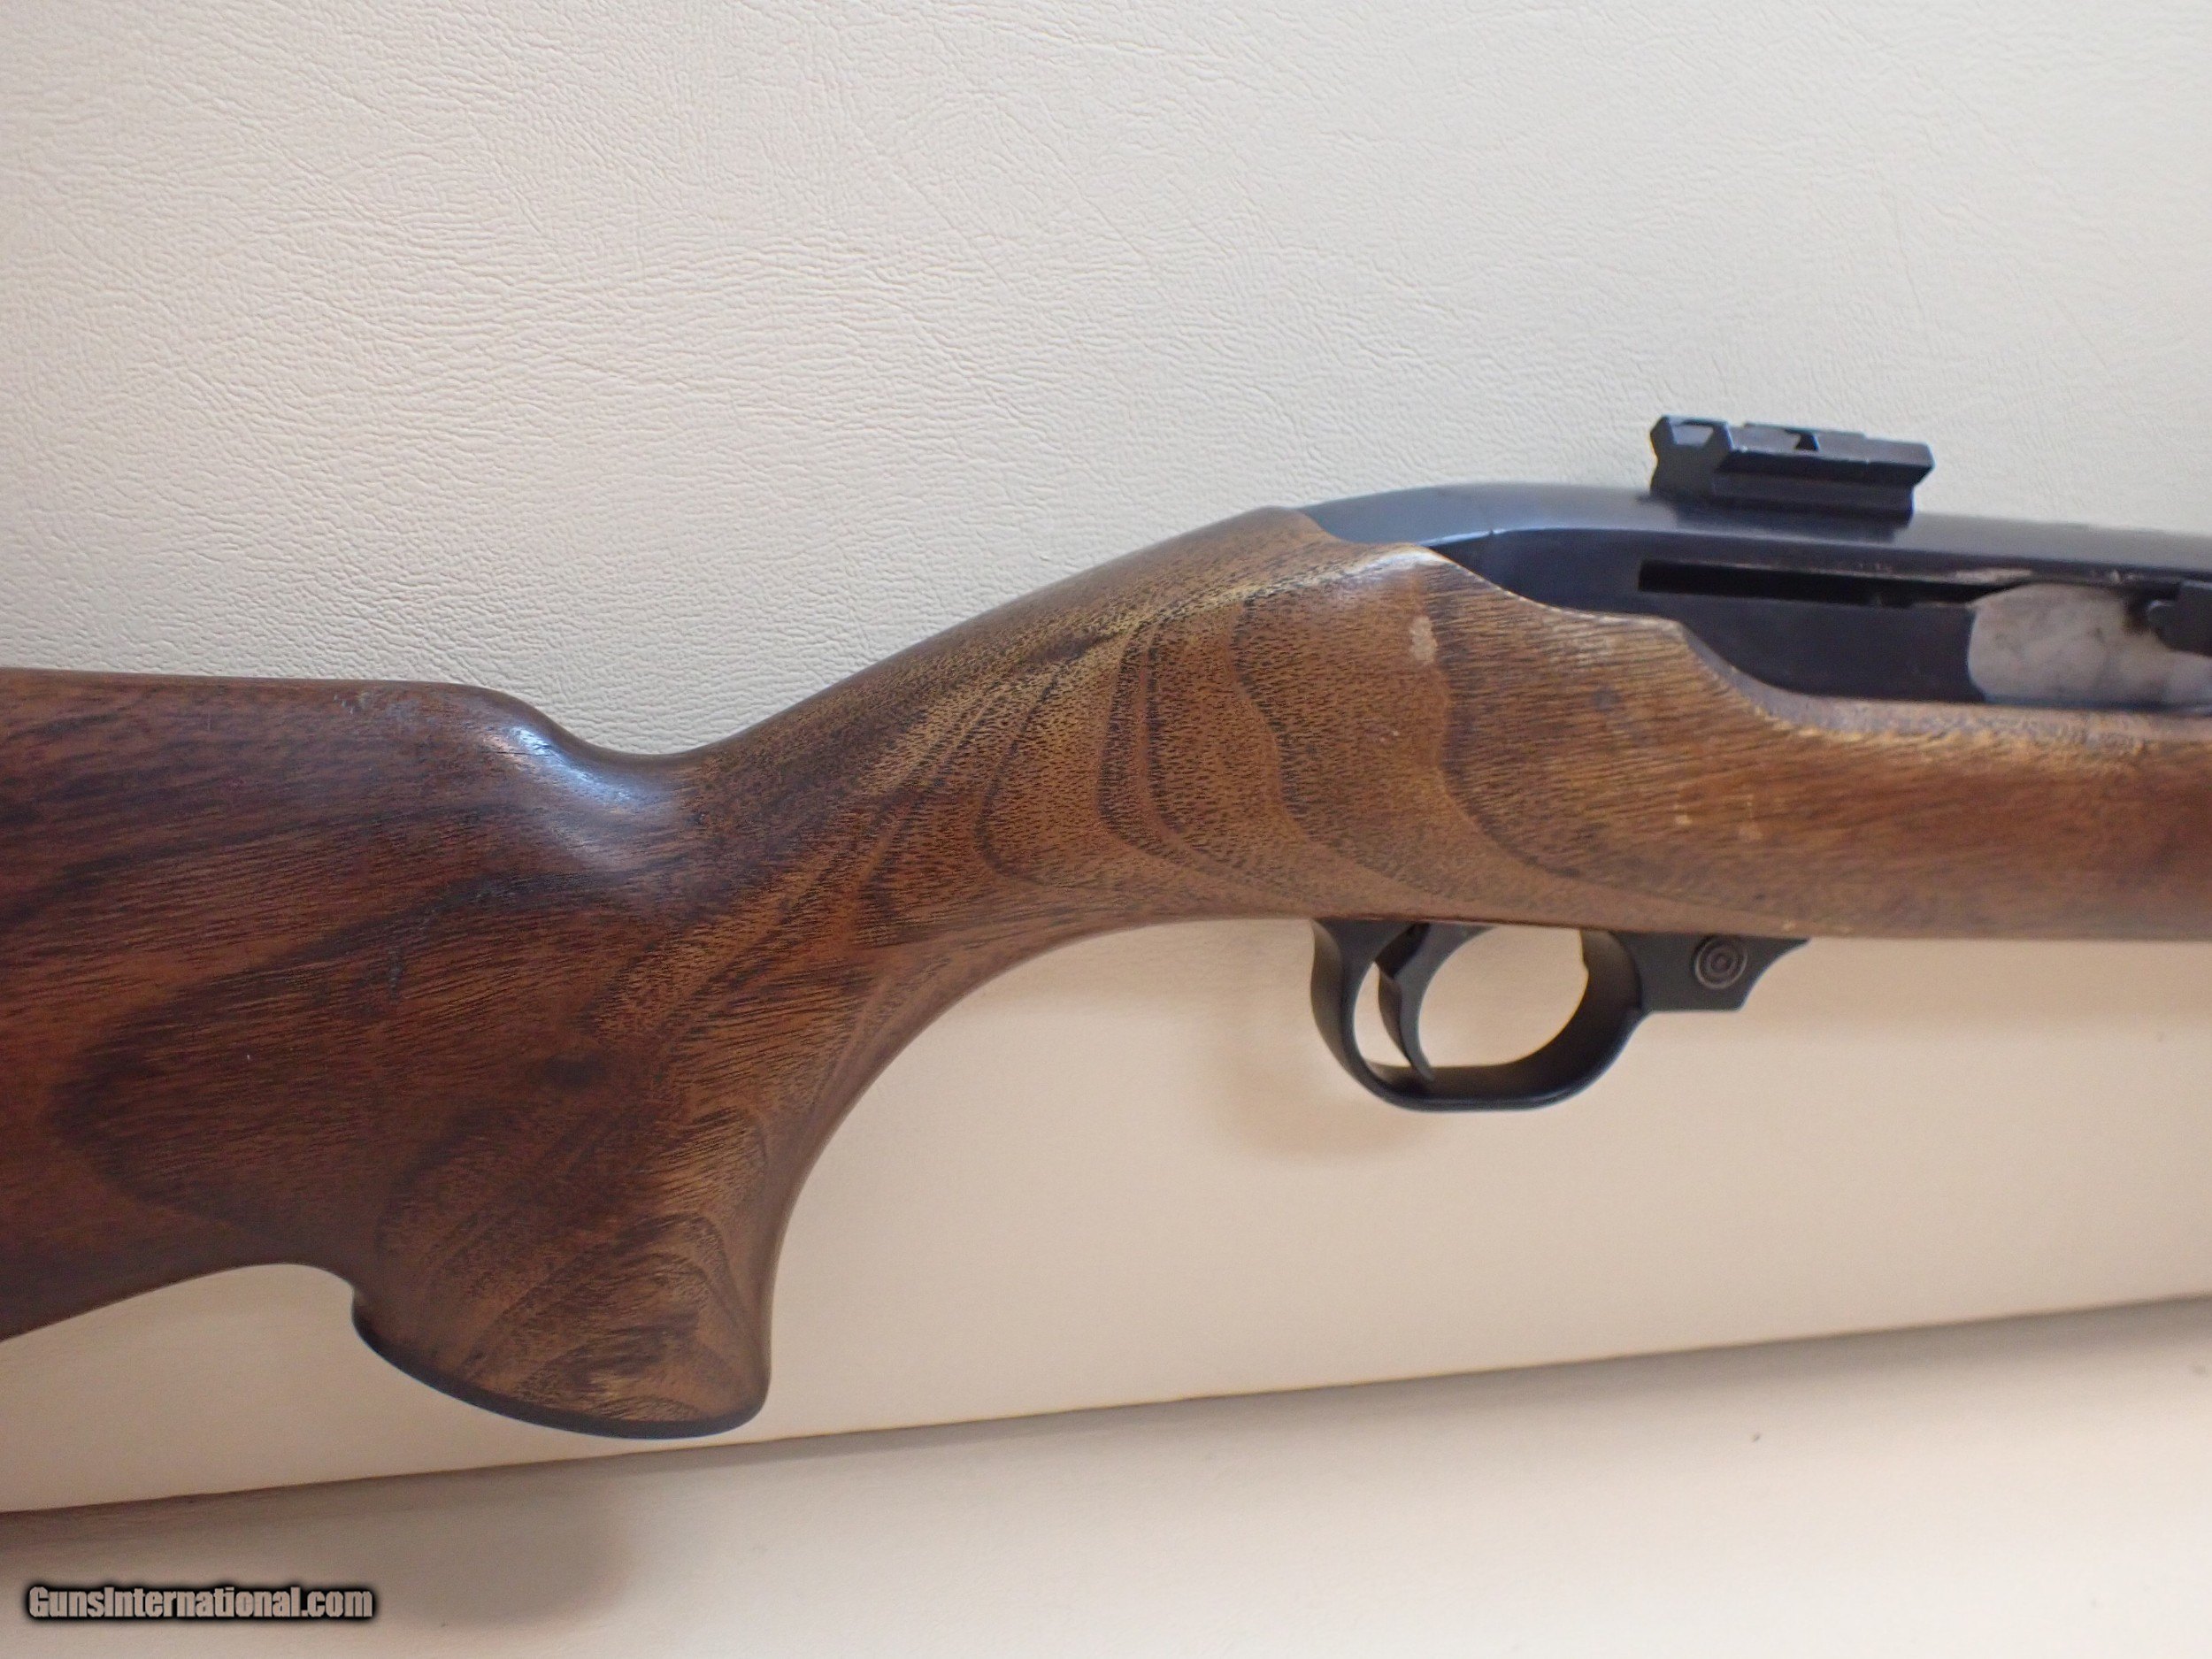 Ruger age by serial number